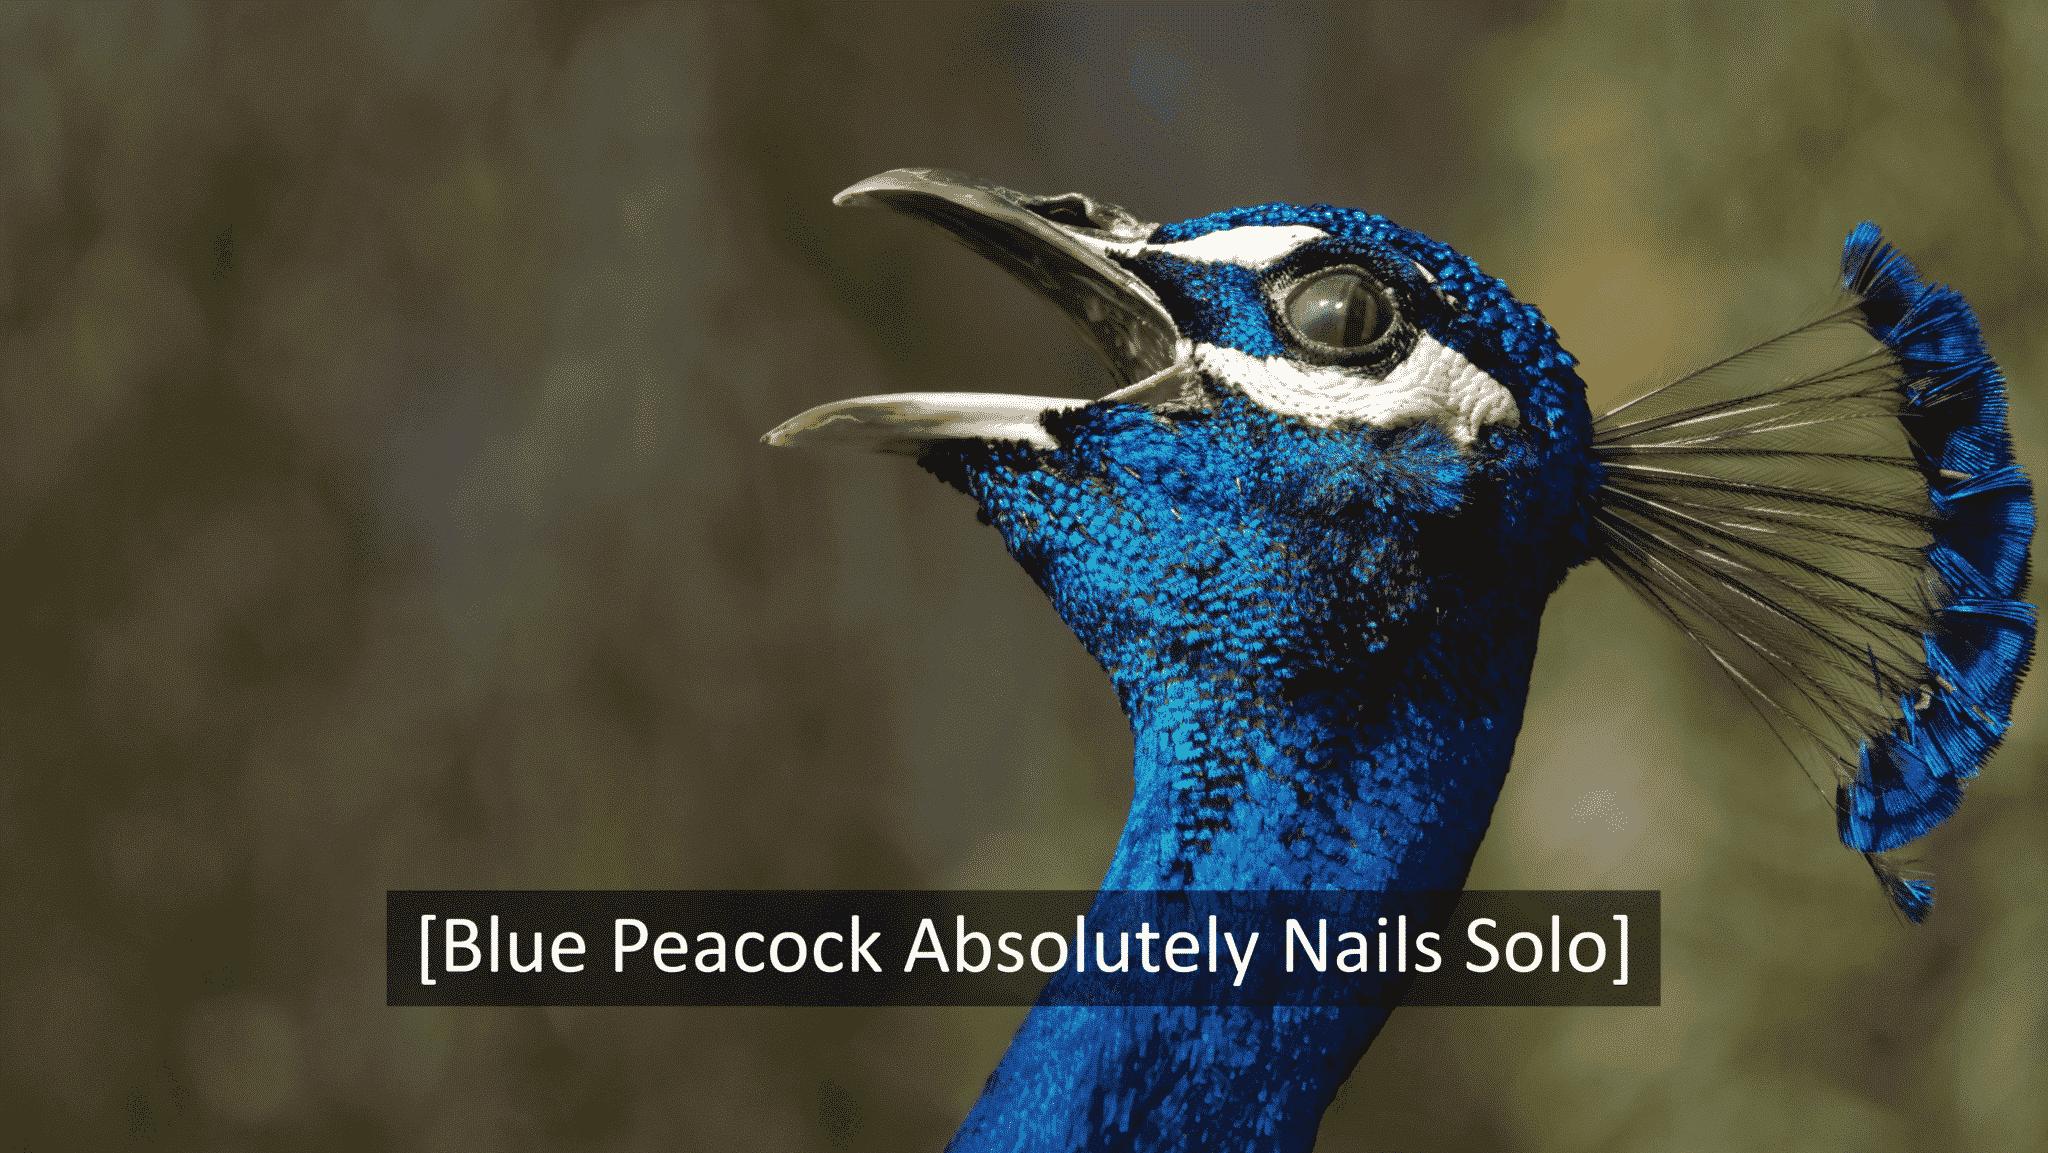 blue peacock calling out with caption [Blue Peacock Absolutely Nails Solo]